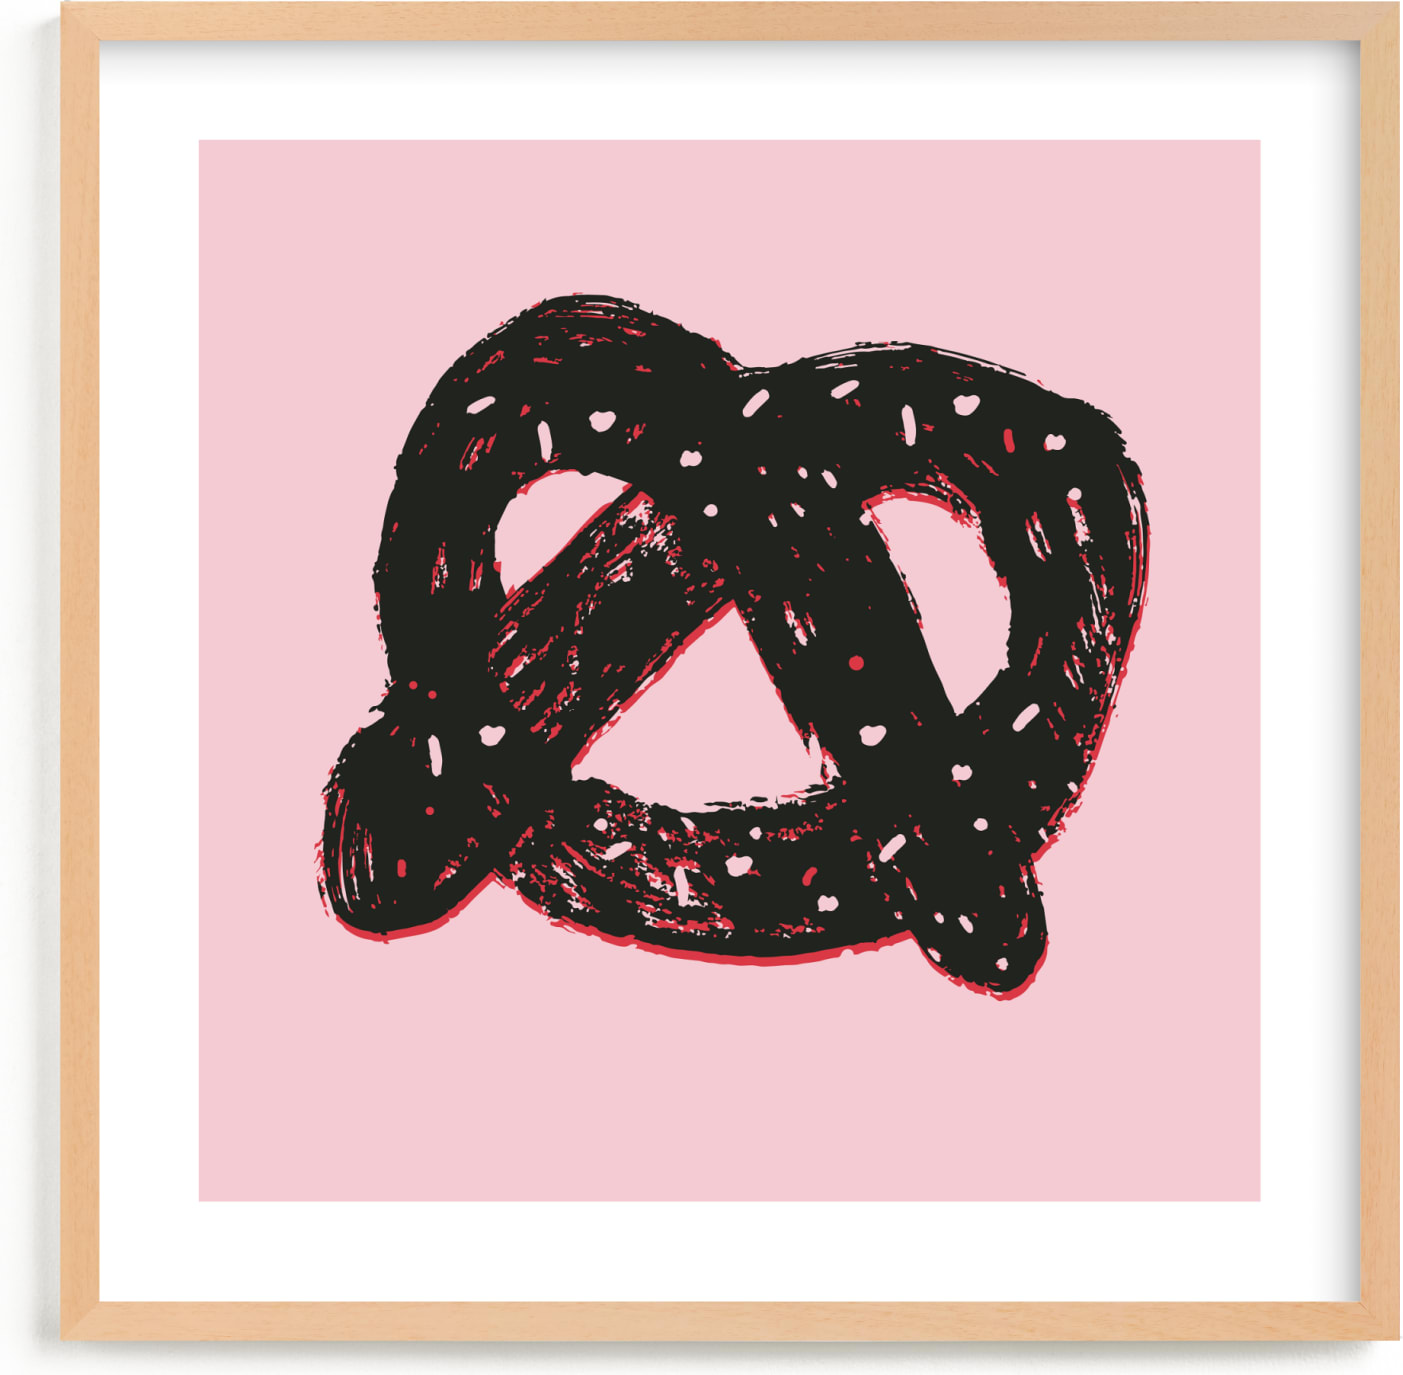 This is a black and white kids wall art by Jordan Sondler called Pretzel.